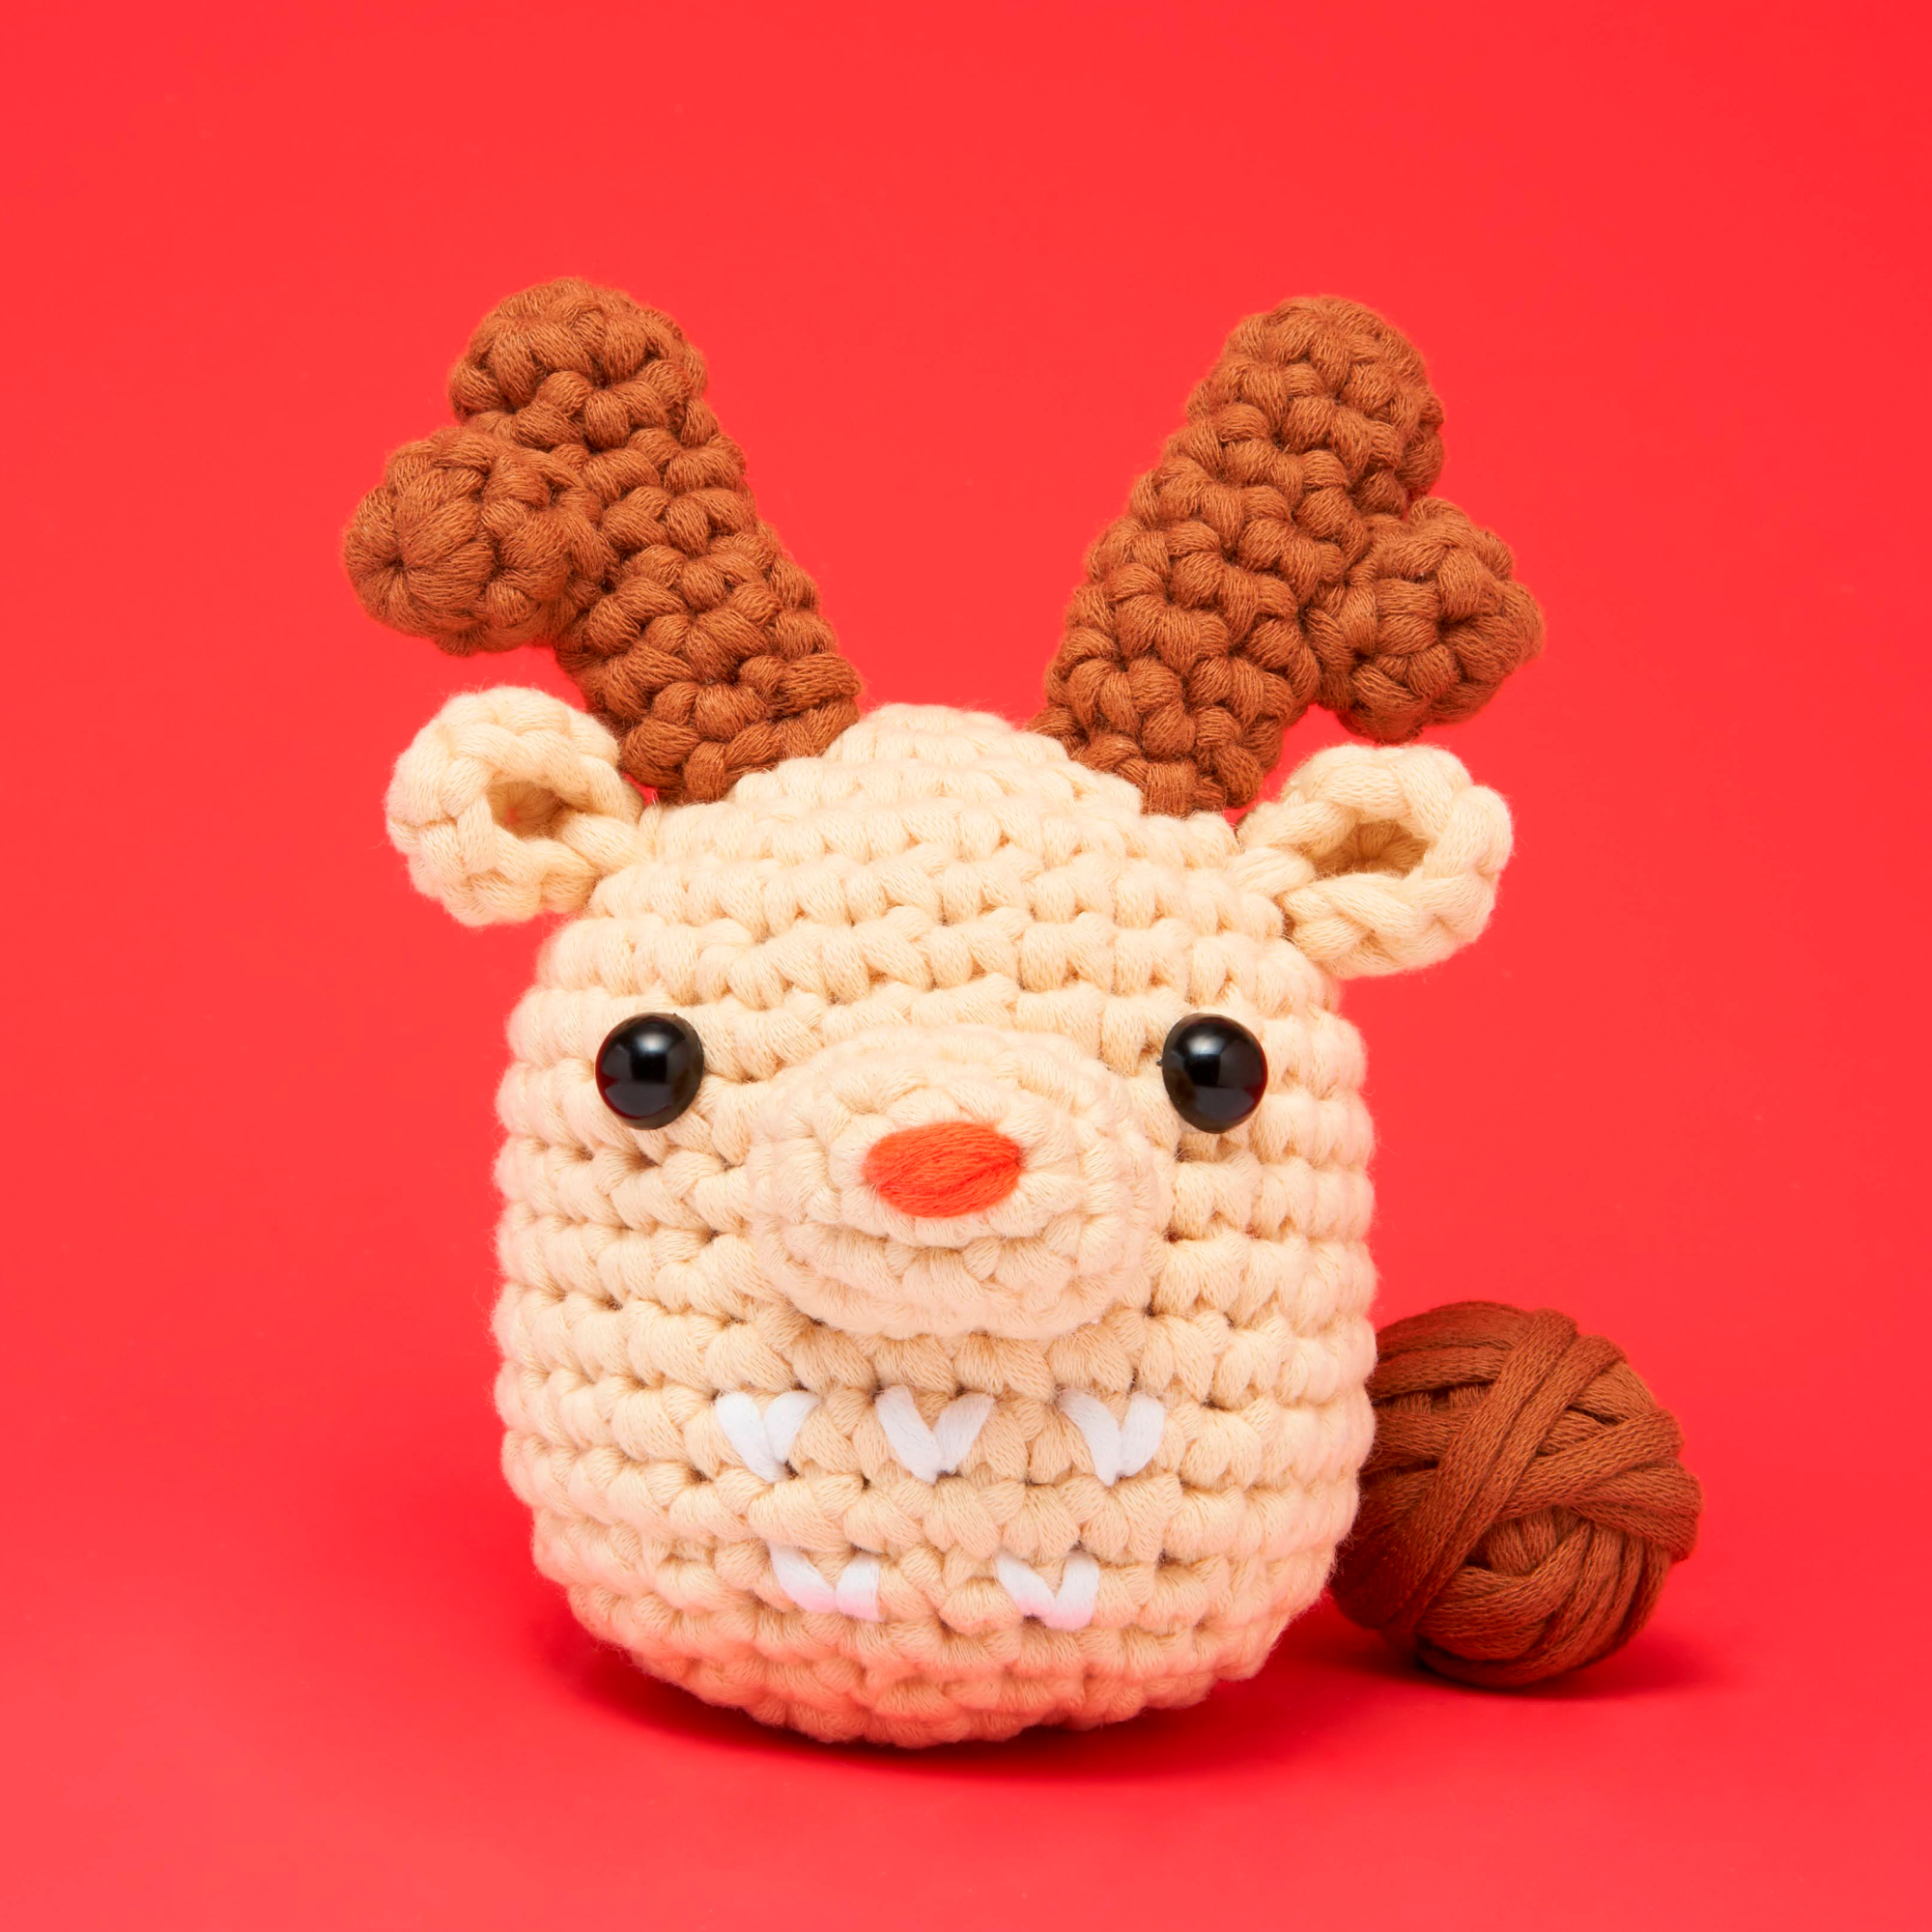 The Woobles Crochet Kit Ralph the Reindeer Learn To DIY Beginners